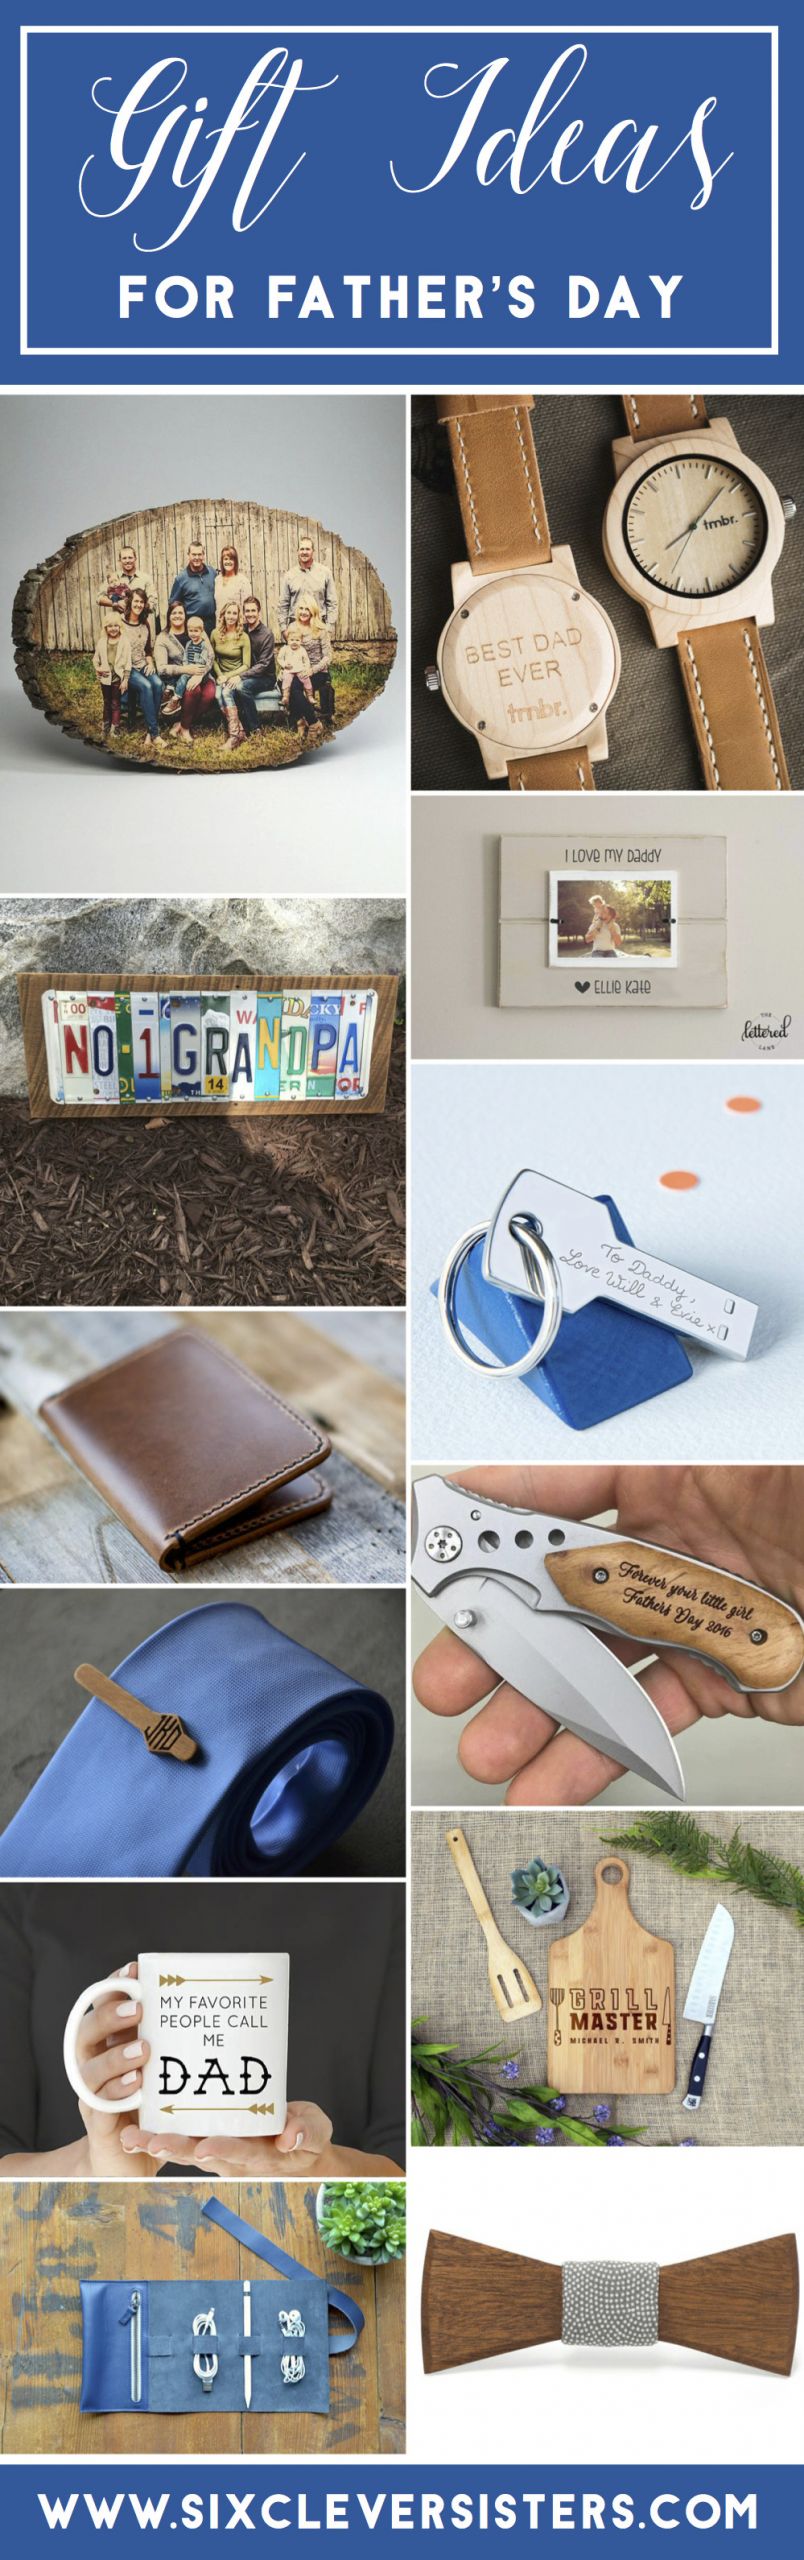 Great Father'S Day Gift Ideas
 25 Great Father s Day Gift Ideas on Etsy that are amazing